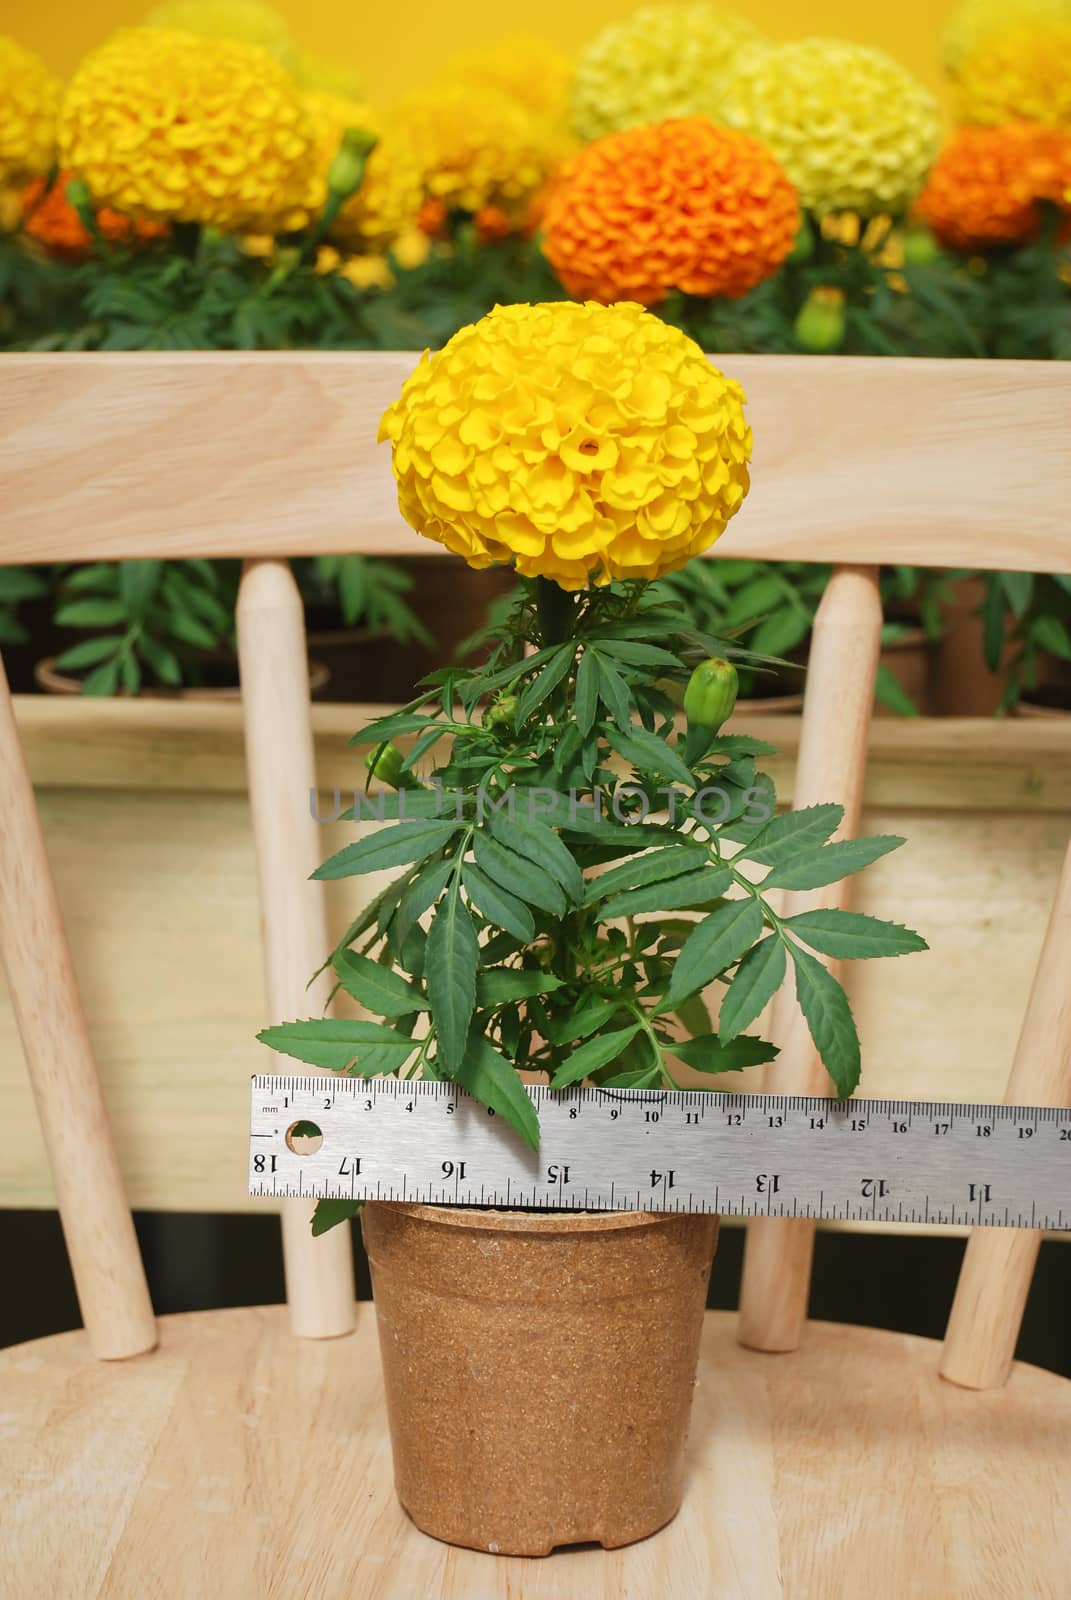 Marigolds Yellow Color (Tagetes erecta, Mexican marigold) by yuiyuize